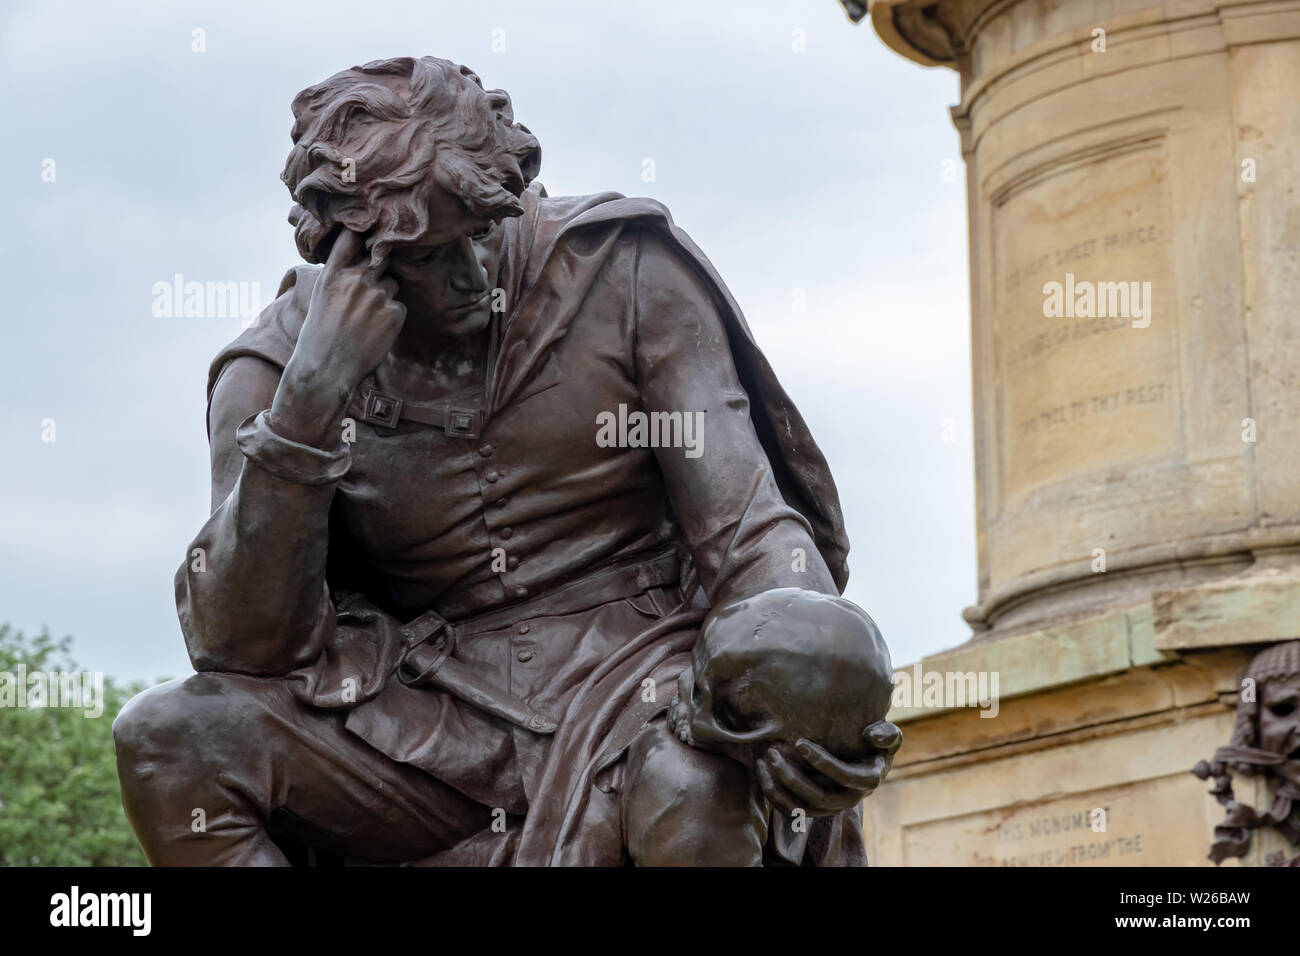 A bronze sculpture of Hamlet with the skull of the jester Yorick at the Gower Memorial in Stratford Upon Avon Stock Photo